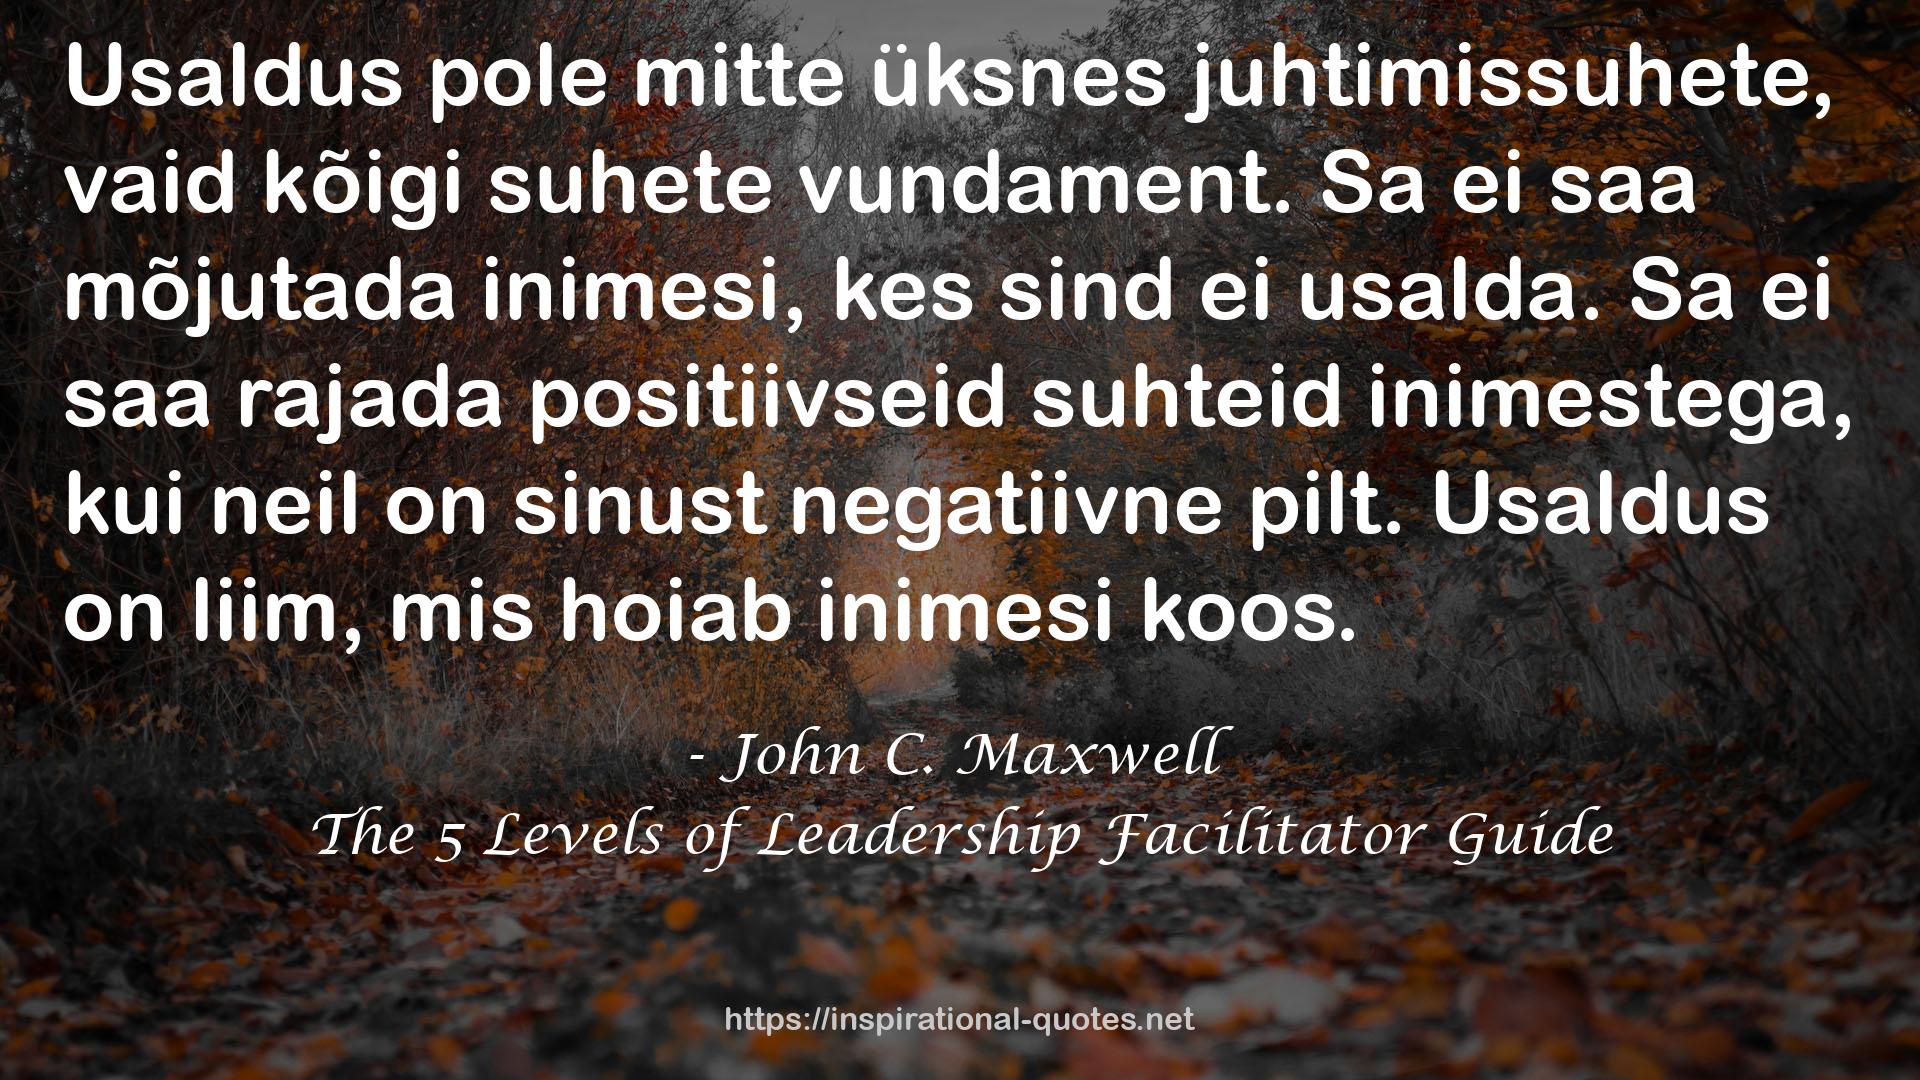 The 5 Levels of Leadership Facilitator Guide QUOTES